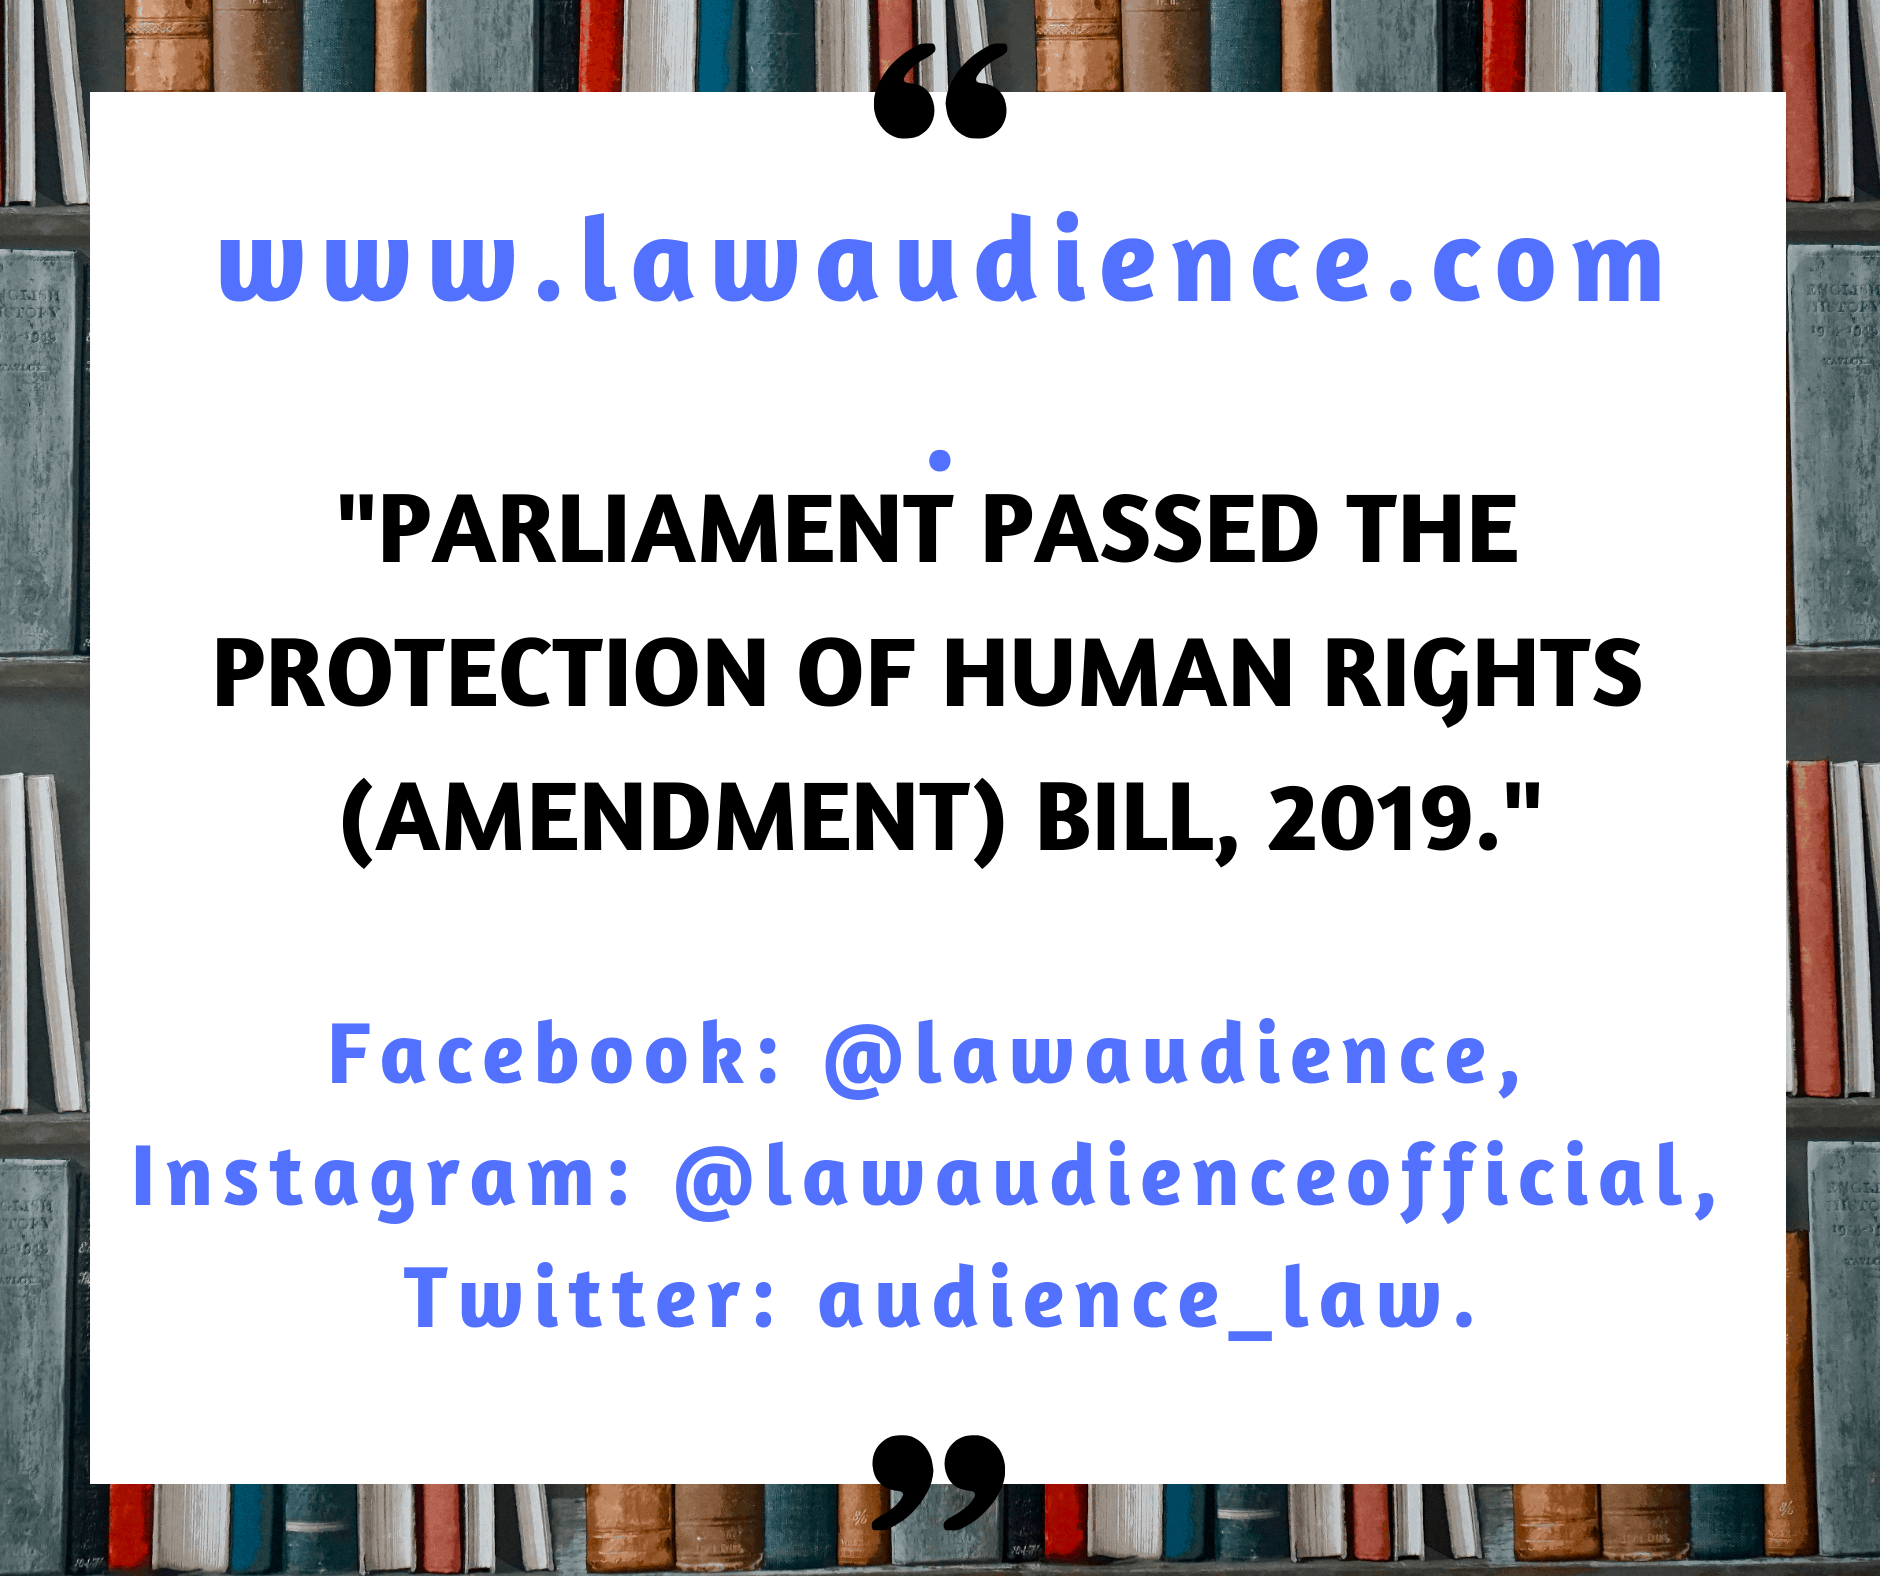 You are currently viewing Parliament Passed the Protection of Human Rights (Amendment) Bill, 2019.